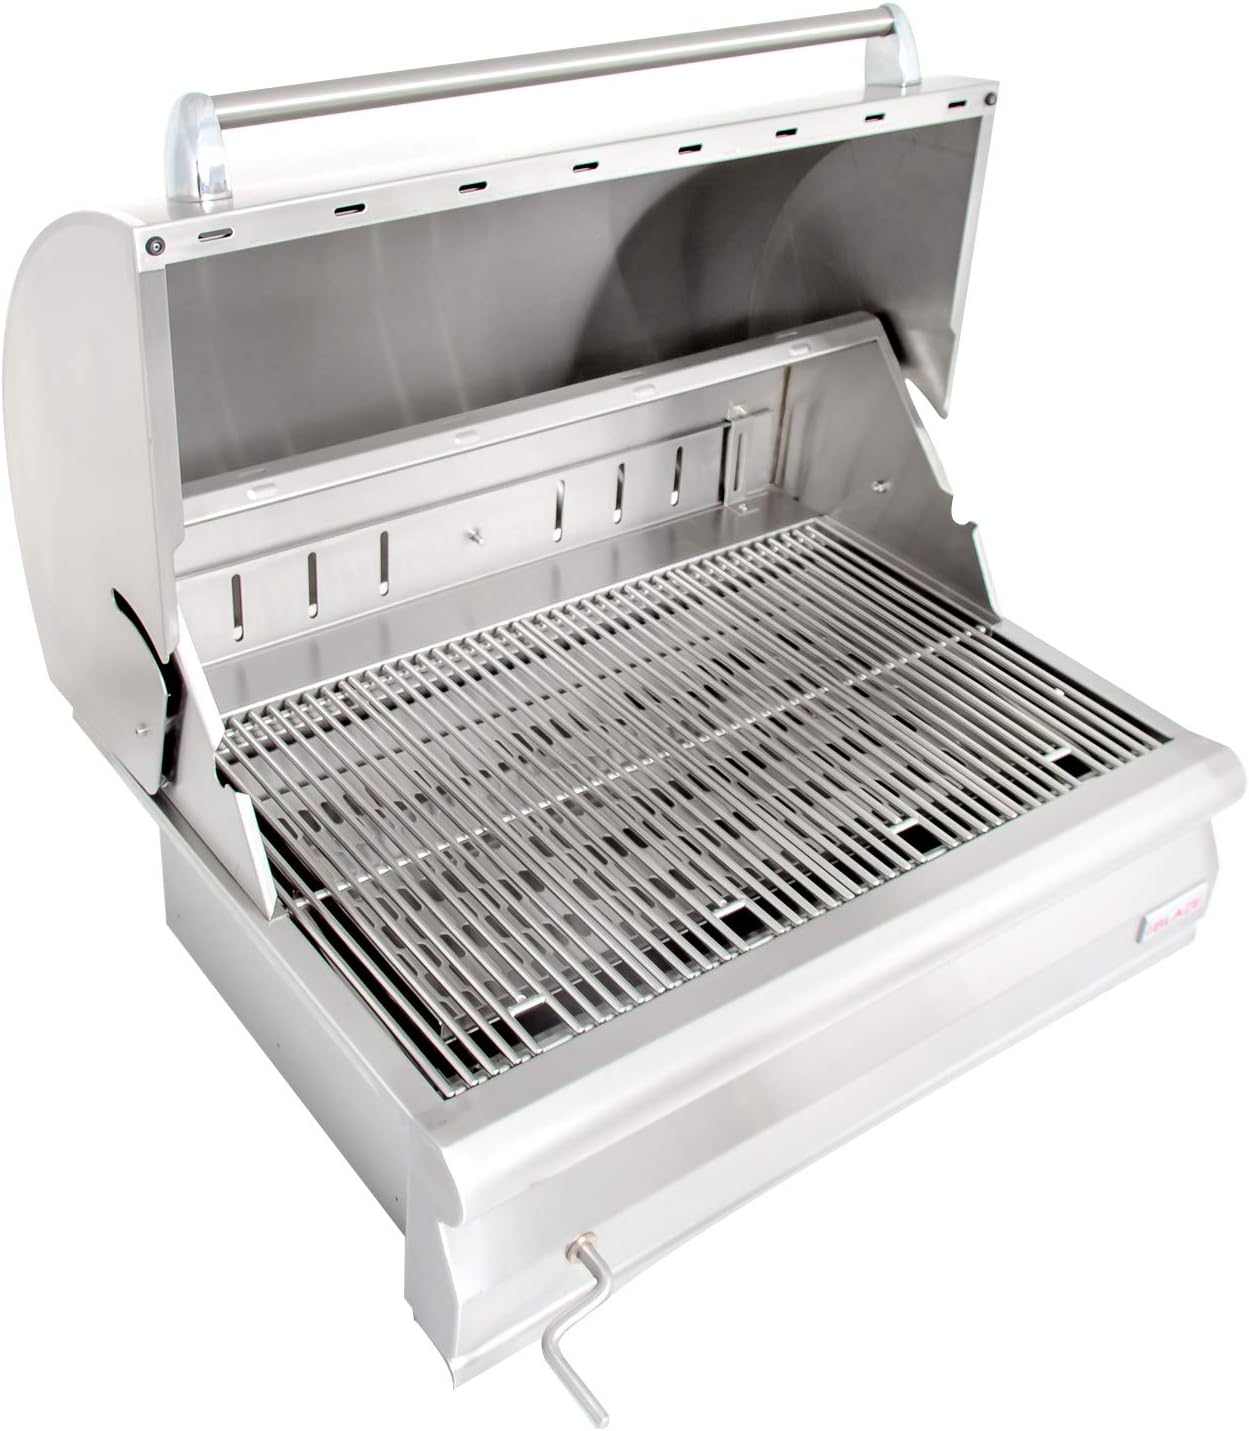 33 Built-In Charcoal Grill